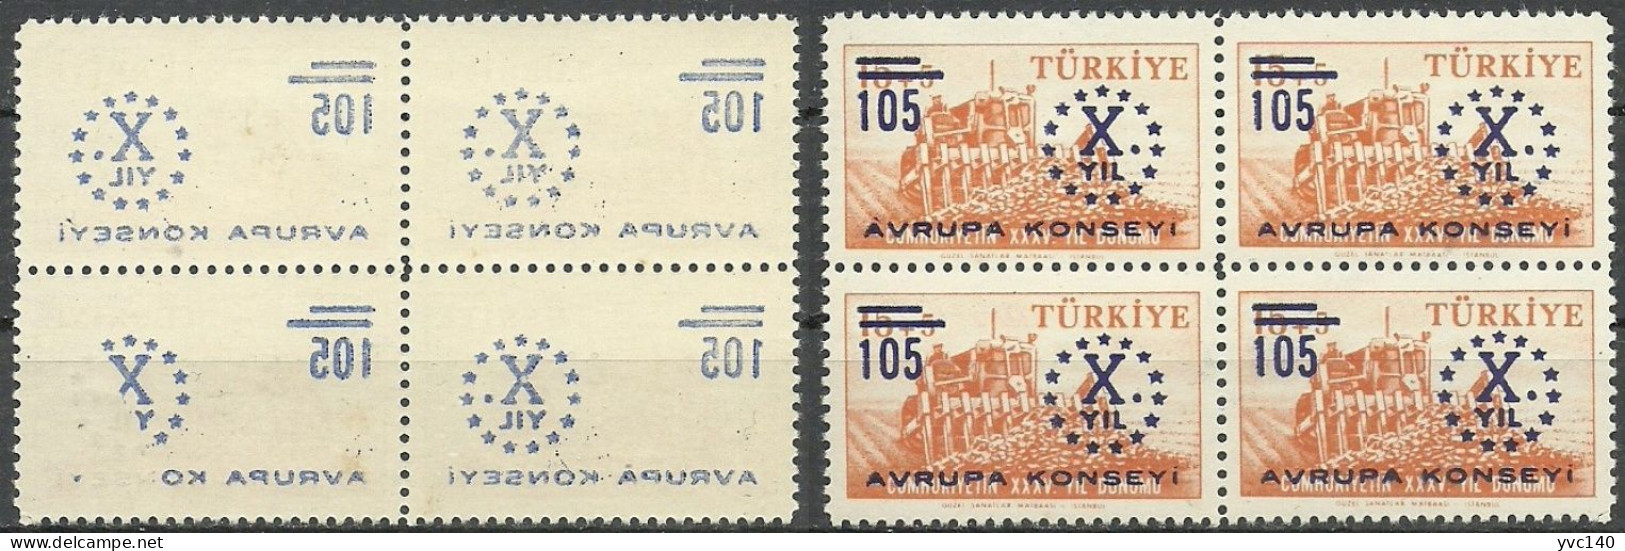 Turkey; 1959 10th Anniv. Of The Council Of Europe ERROR "Abklatsch Surcharge" - Unused Stamps